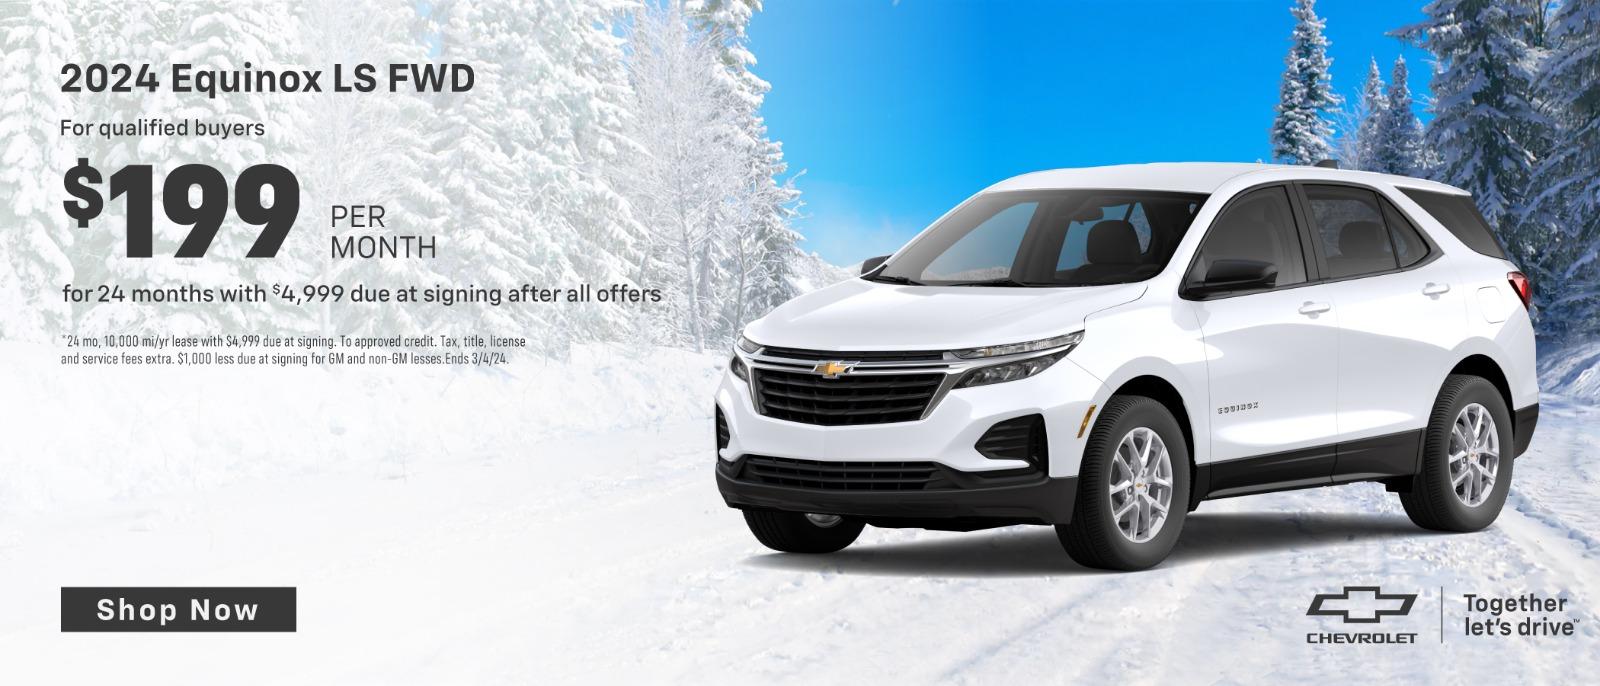 2024 Chevy Equinox lease for $199 per month for 24 months